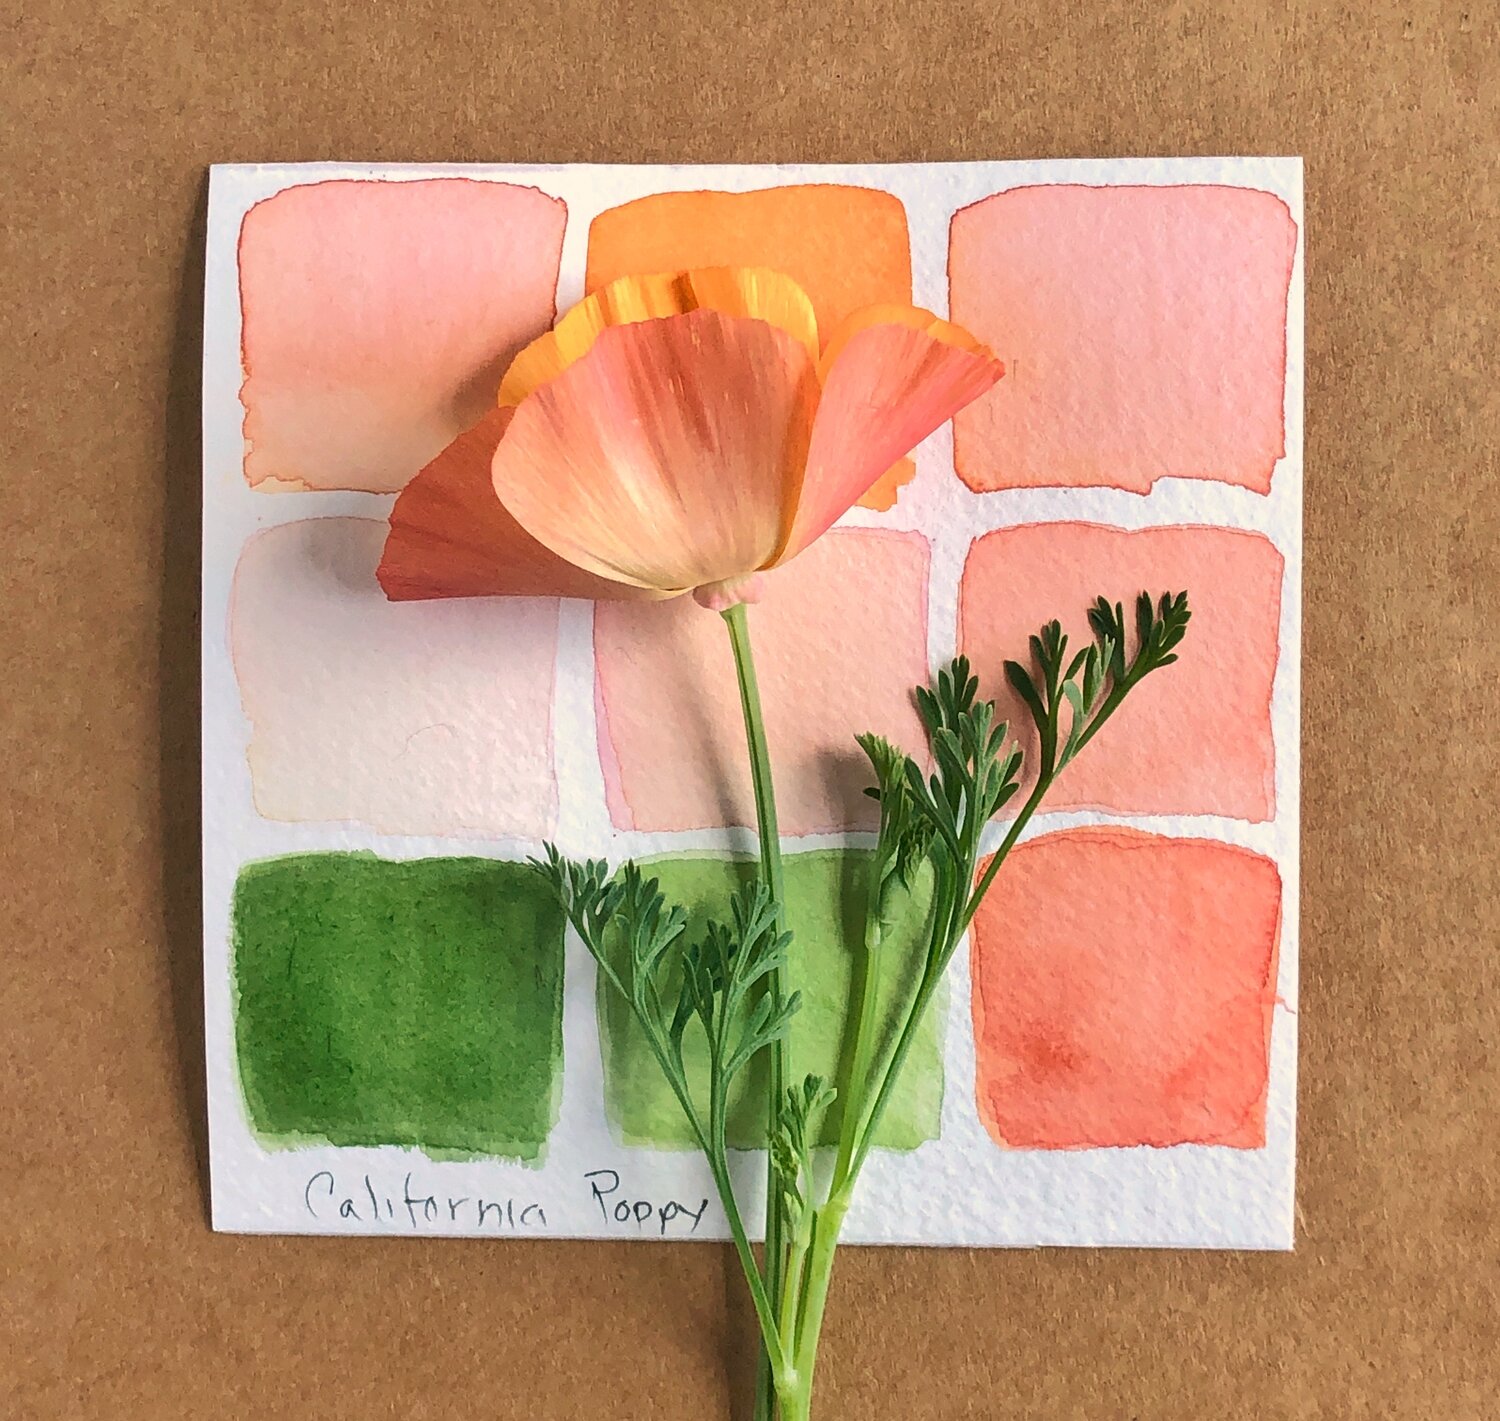 California Poppy Greeting Cards - Plantable Seed Paper - Apartment Garden  Supply